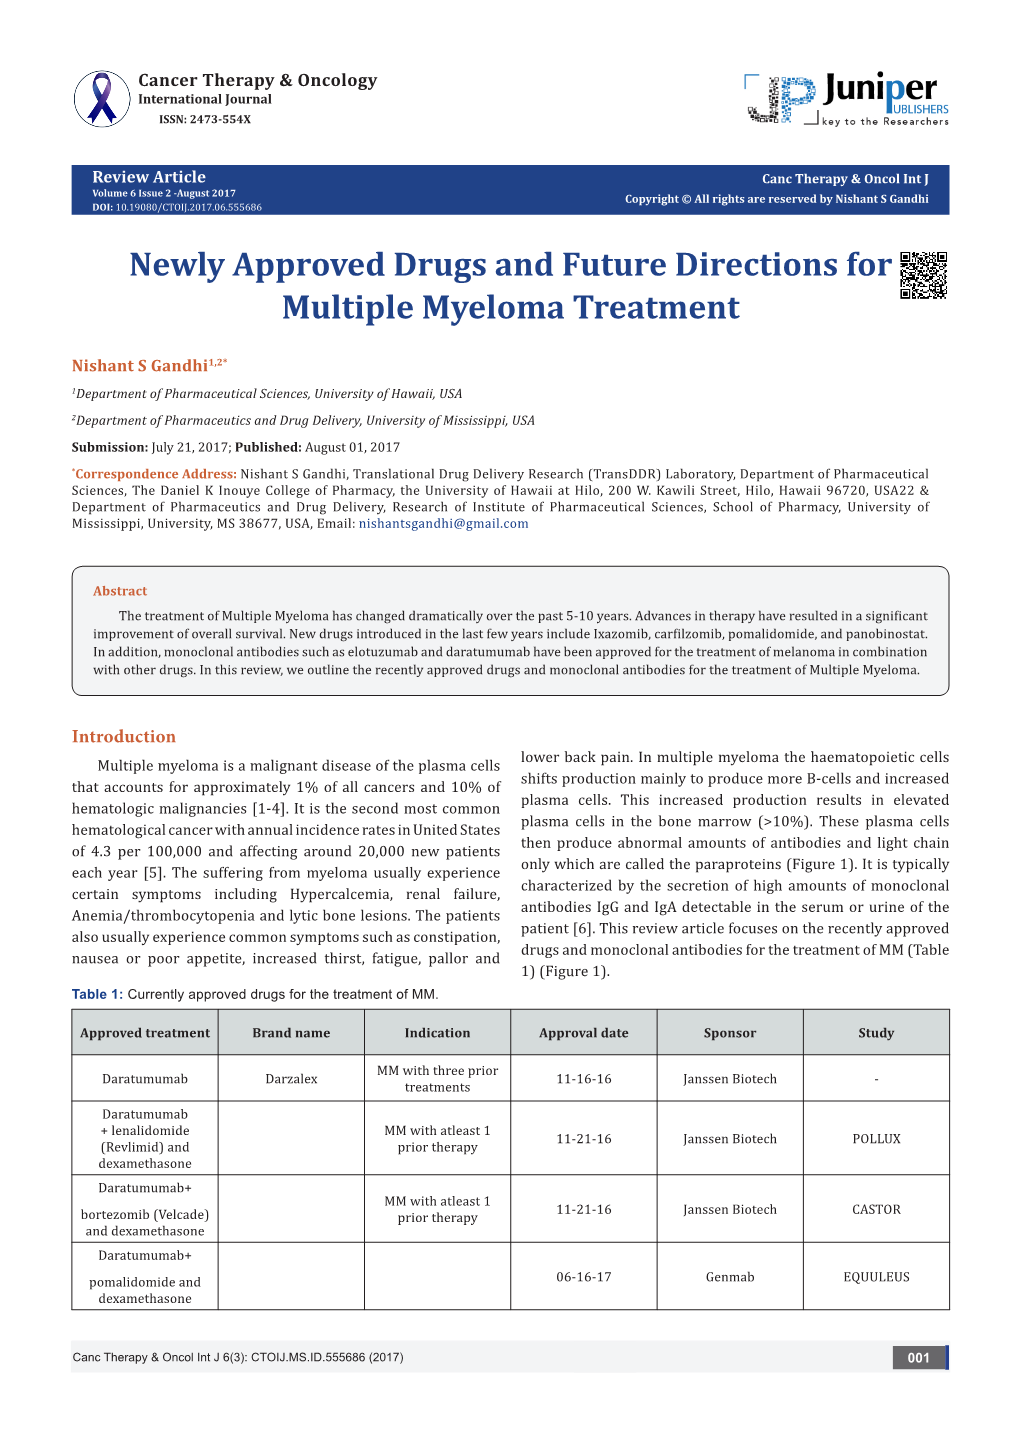 Newly Approved Drugs and Future Directions for Multiple Myeloma Treatment